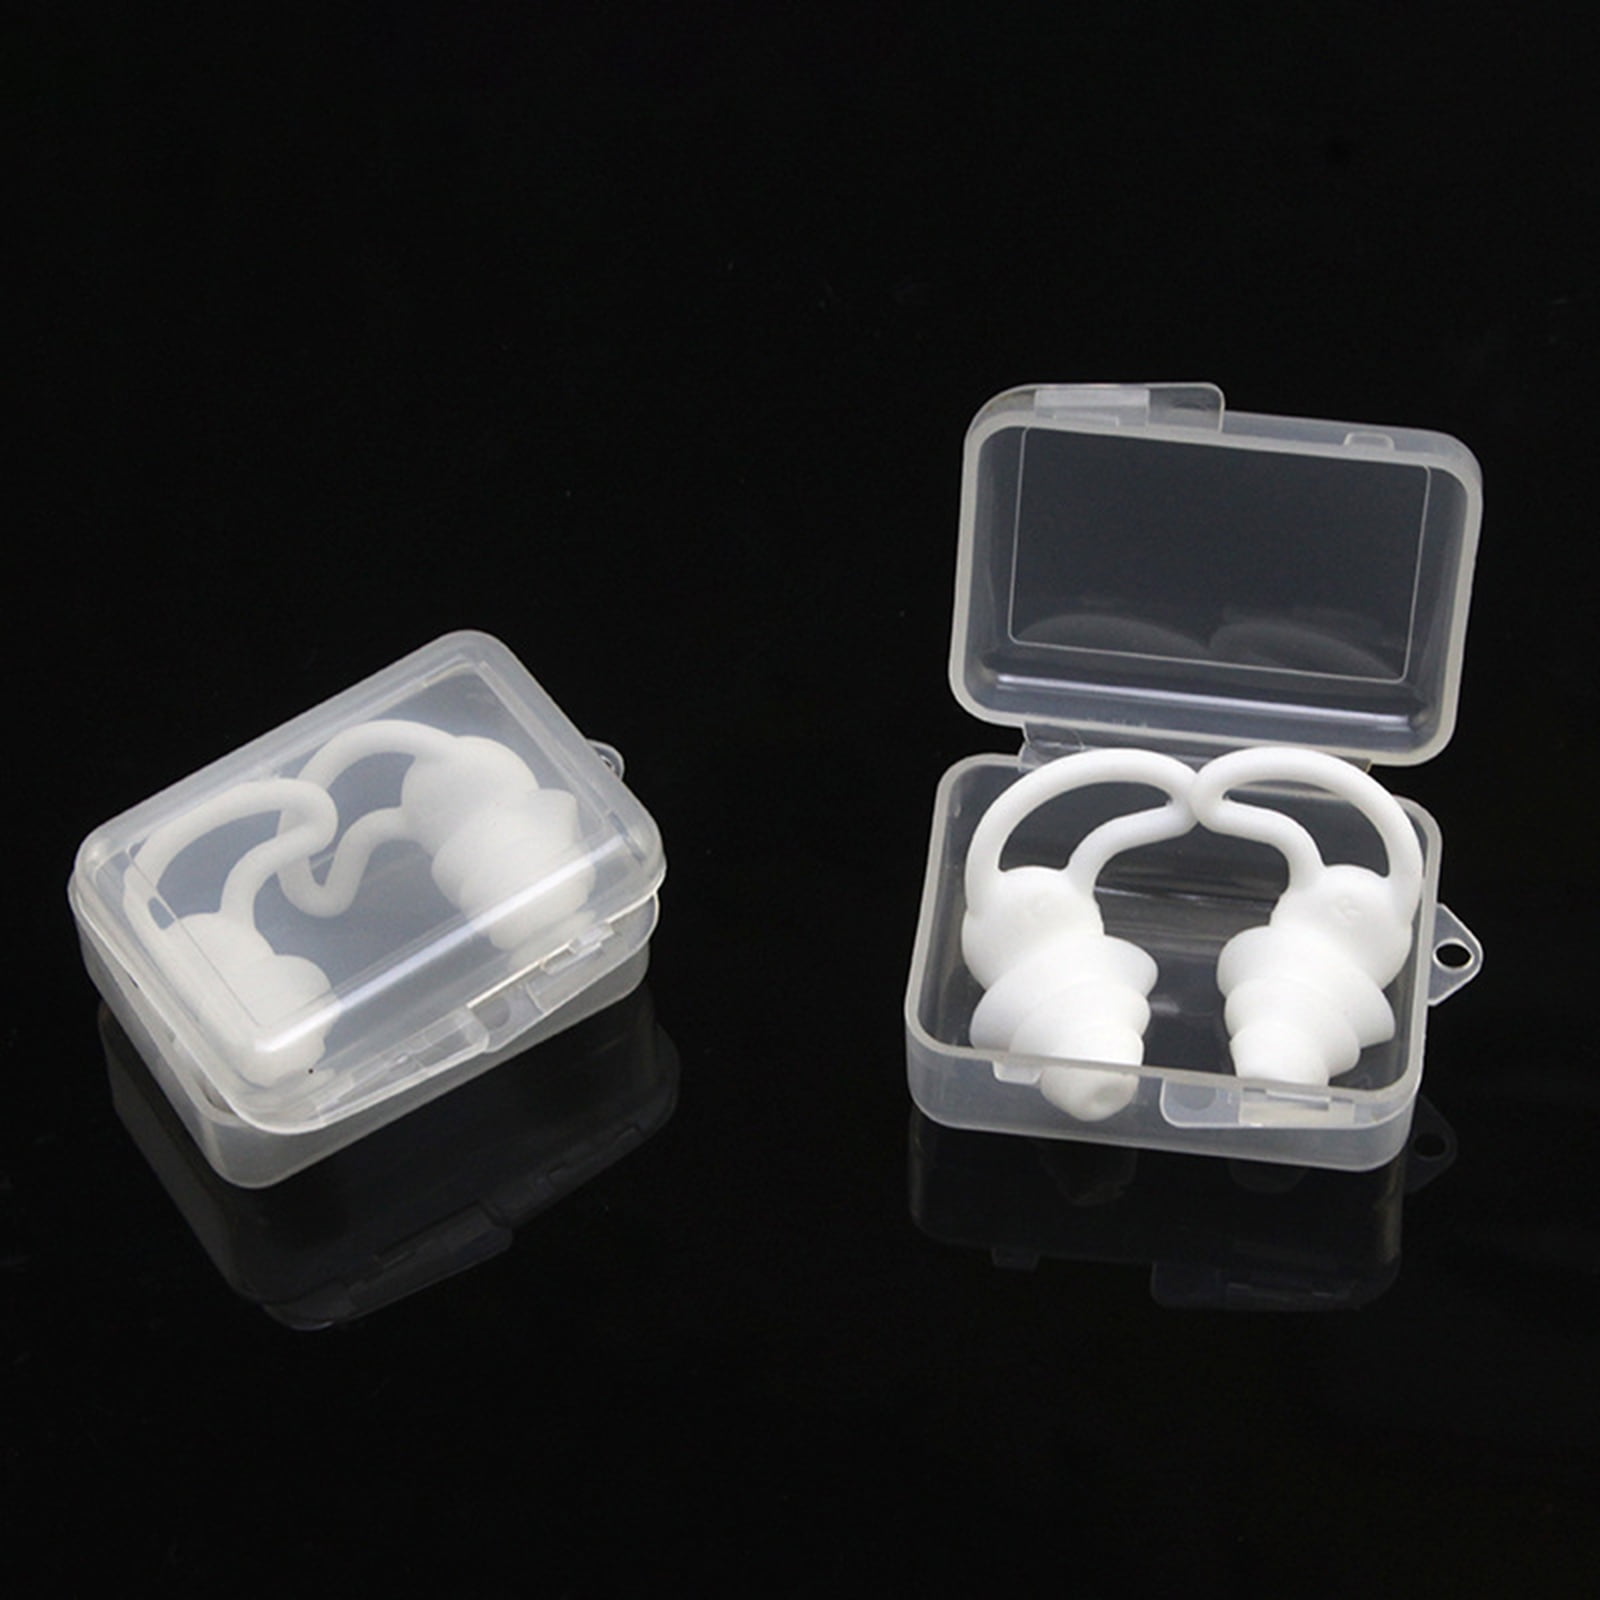 Details about   3 Pairs Soft Noise Reducing White Premium Silicone Earplugs for Sleeping 